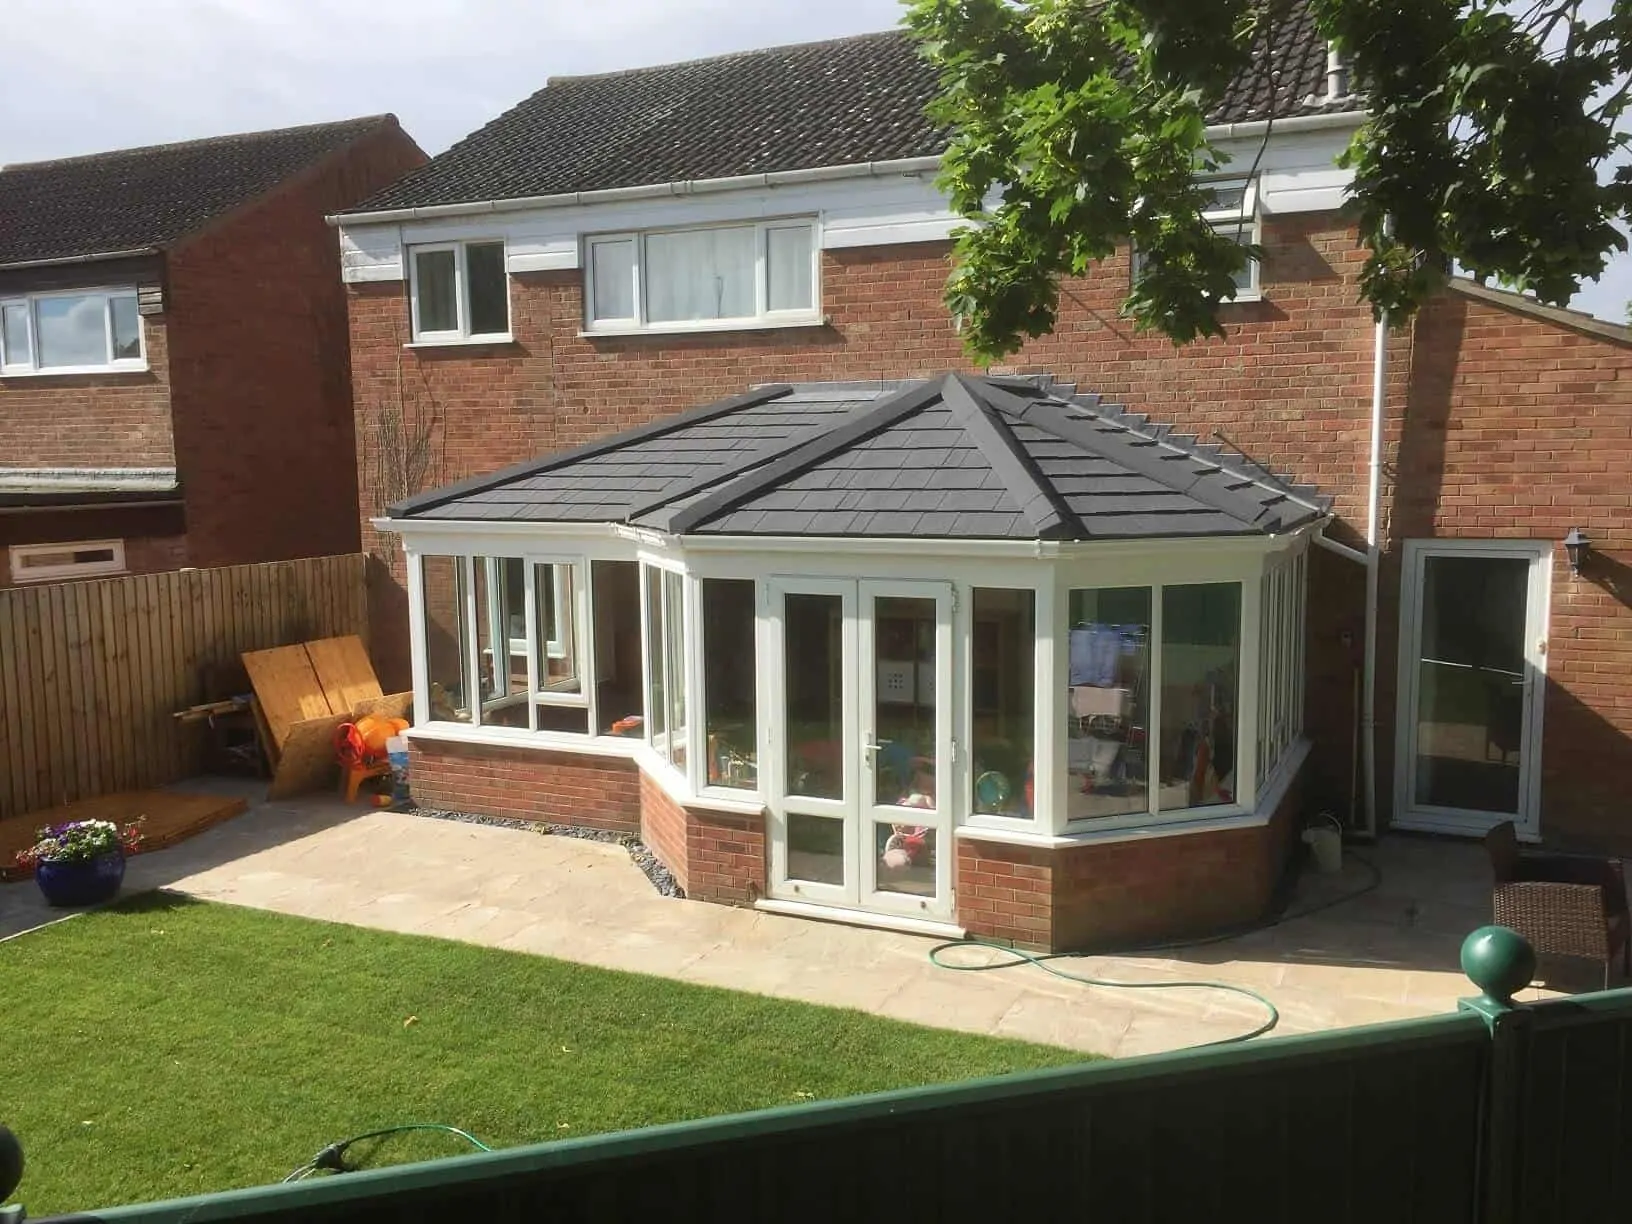 Guardian Warm Roof Finished Project Building Regulations Application Included 